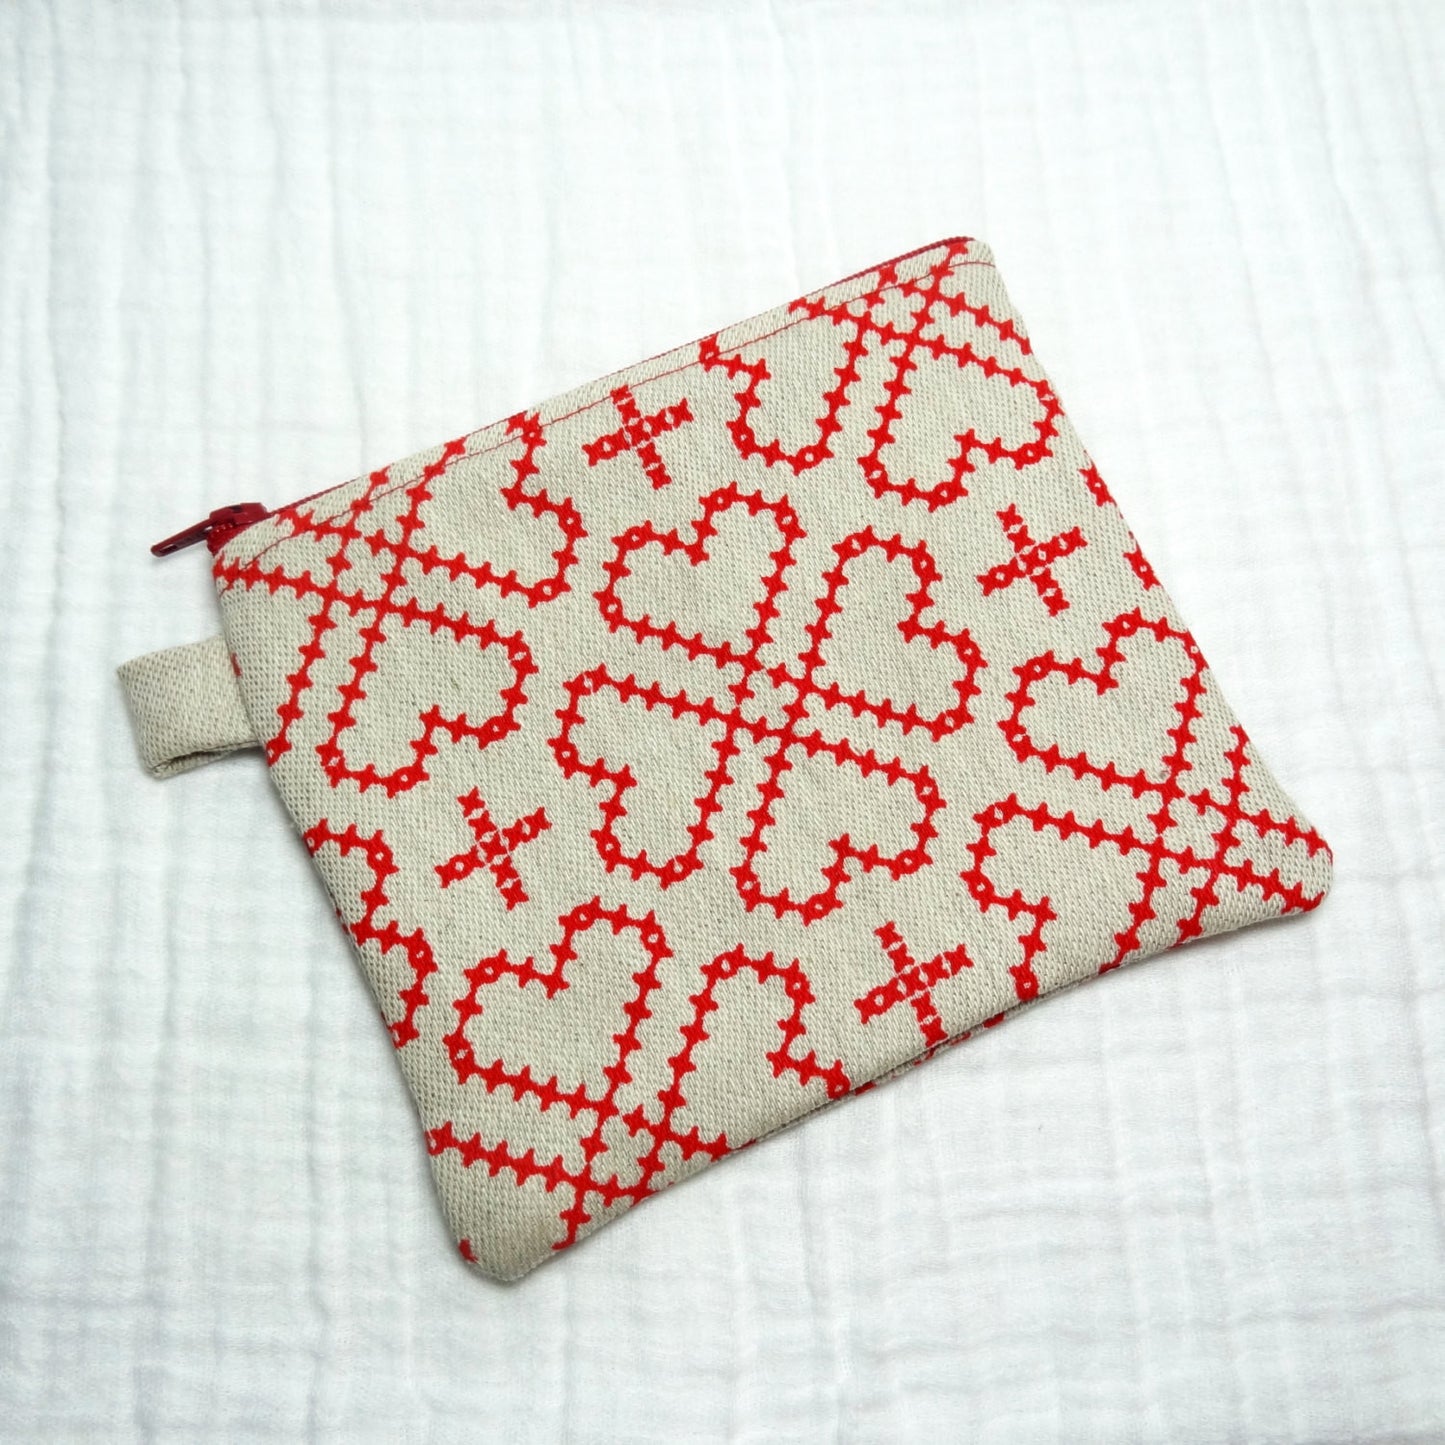 Zippered Pouch - Small Bag - Stitched Hearts